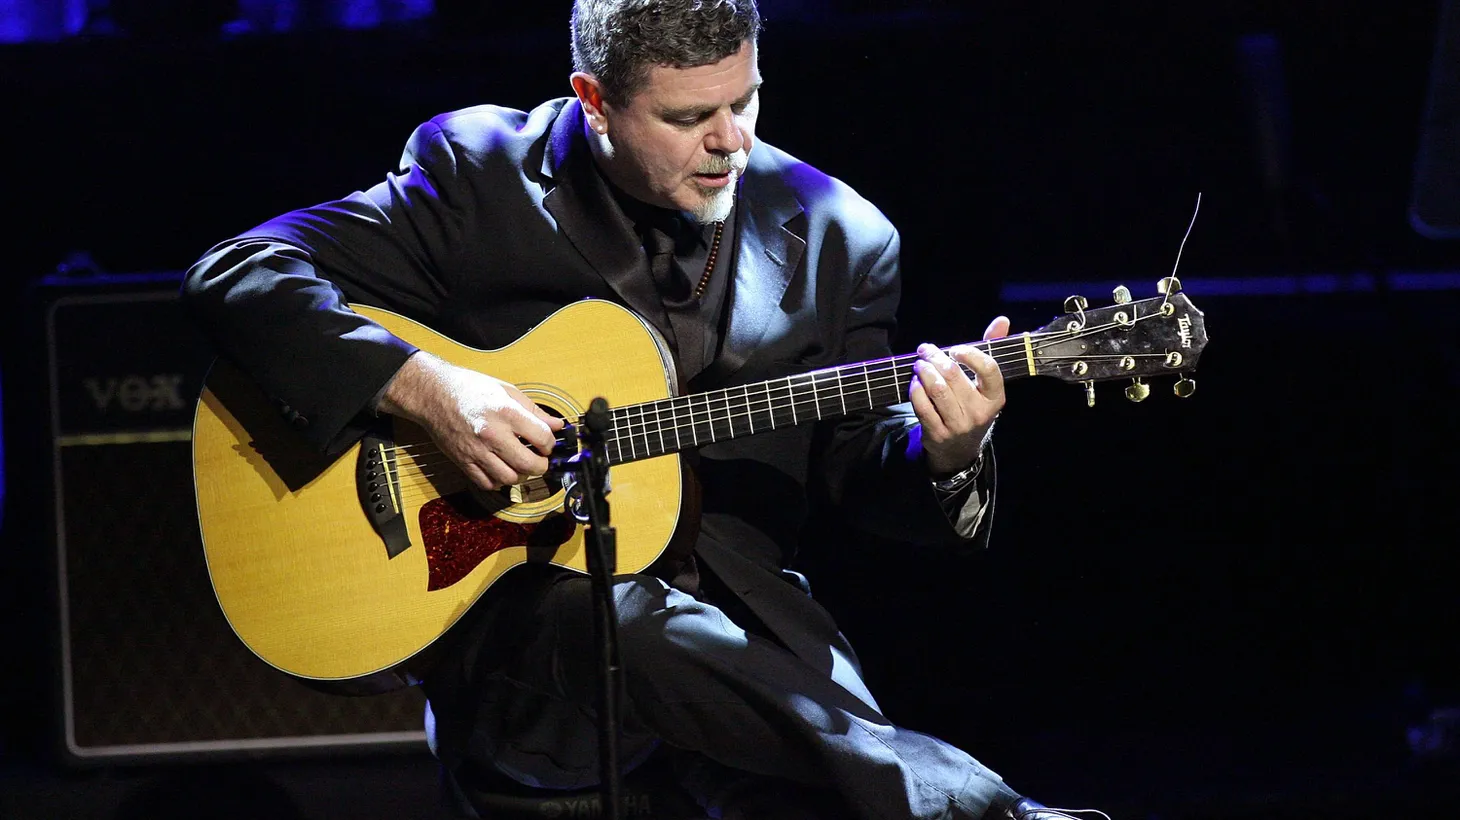 Rock en Espanol producer Gustavo Santaolalla shares new work from Tango-based electronica collective Bajofondo on Morning Becomes Eclectic in the 10 o'clock hour.